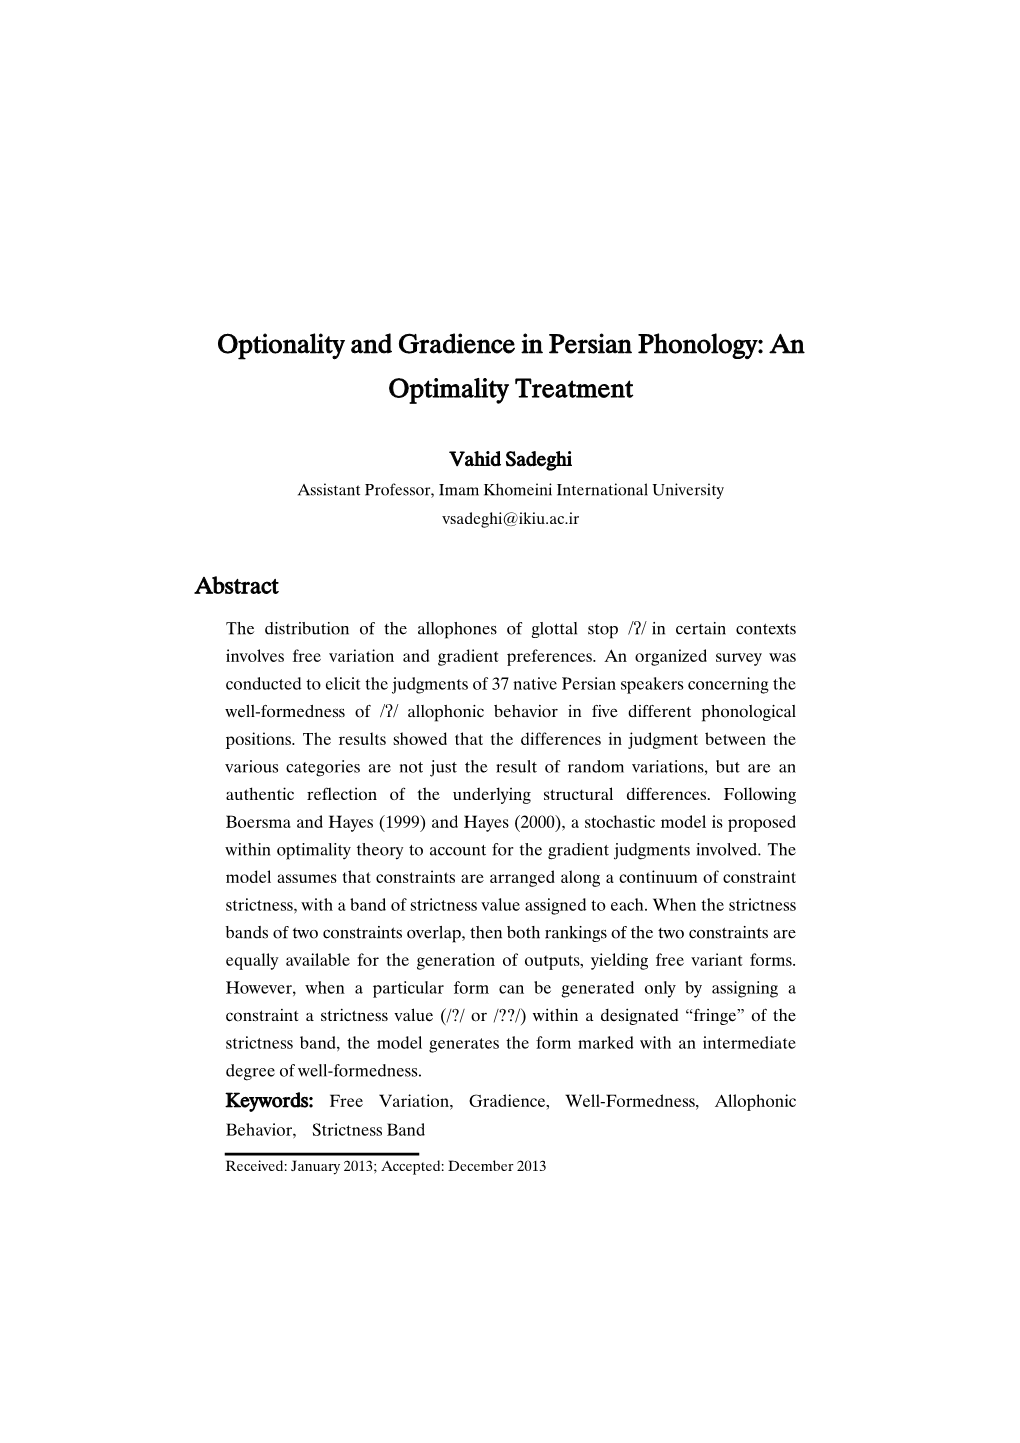 Optionality and Gradience in Persian Phonology